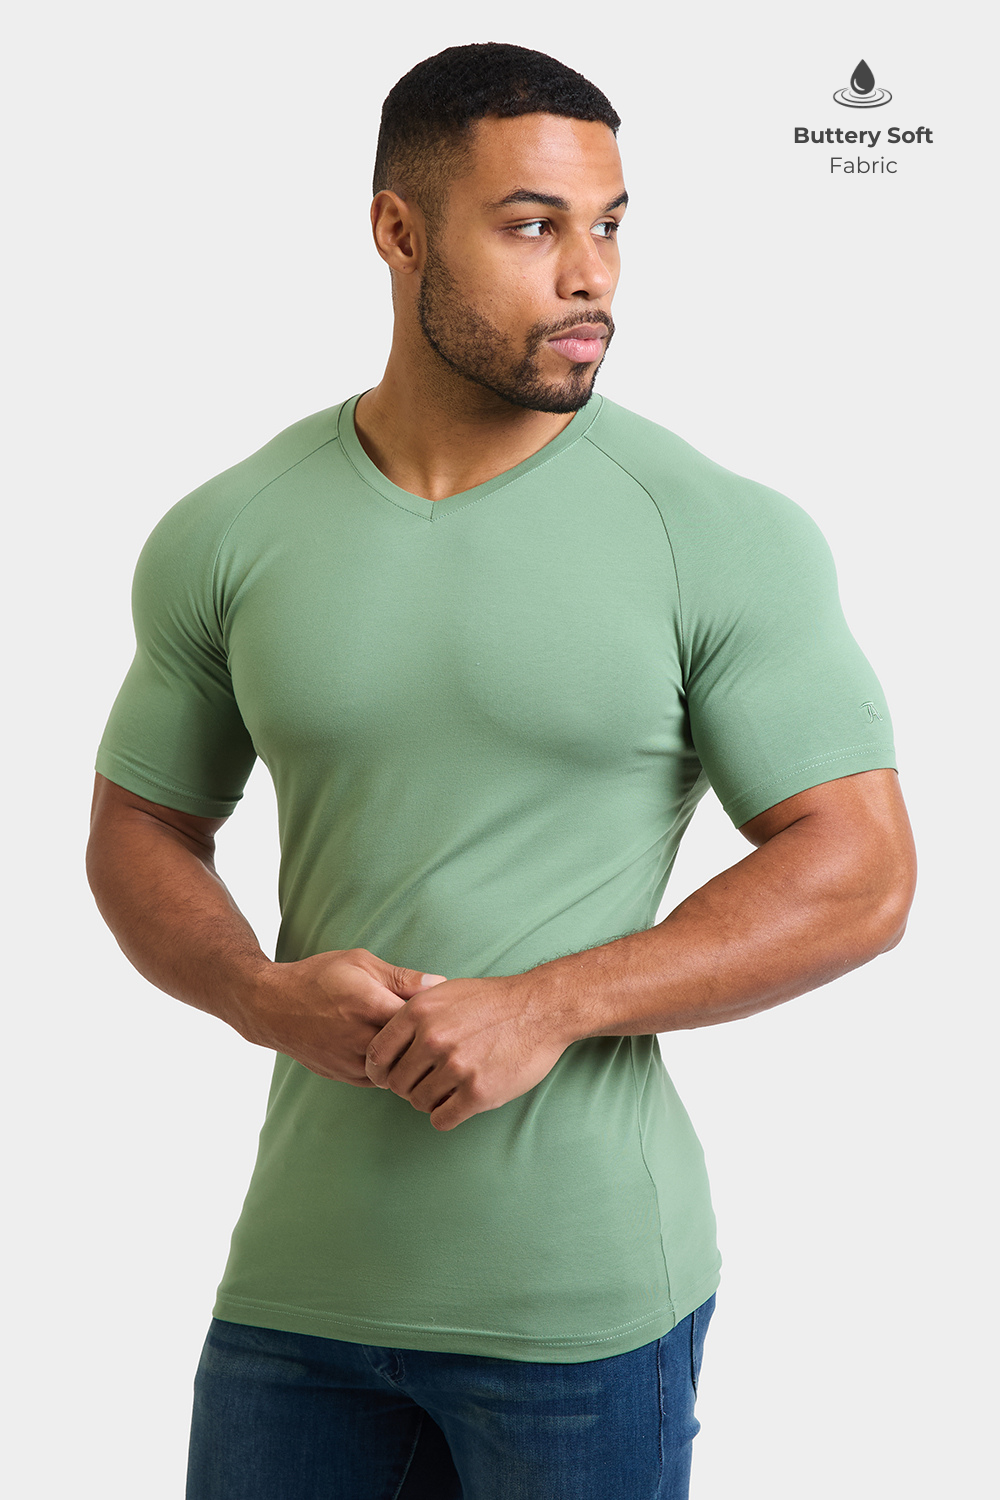 Premium Muscle Fit V-Neck in Soft Sage - TAILORED ATHLETE - ROW